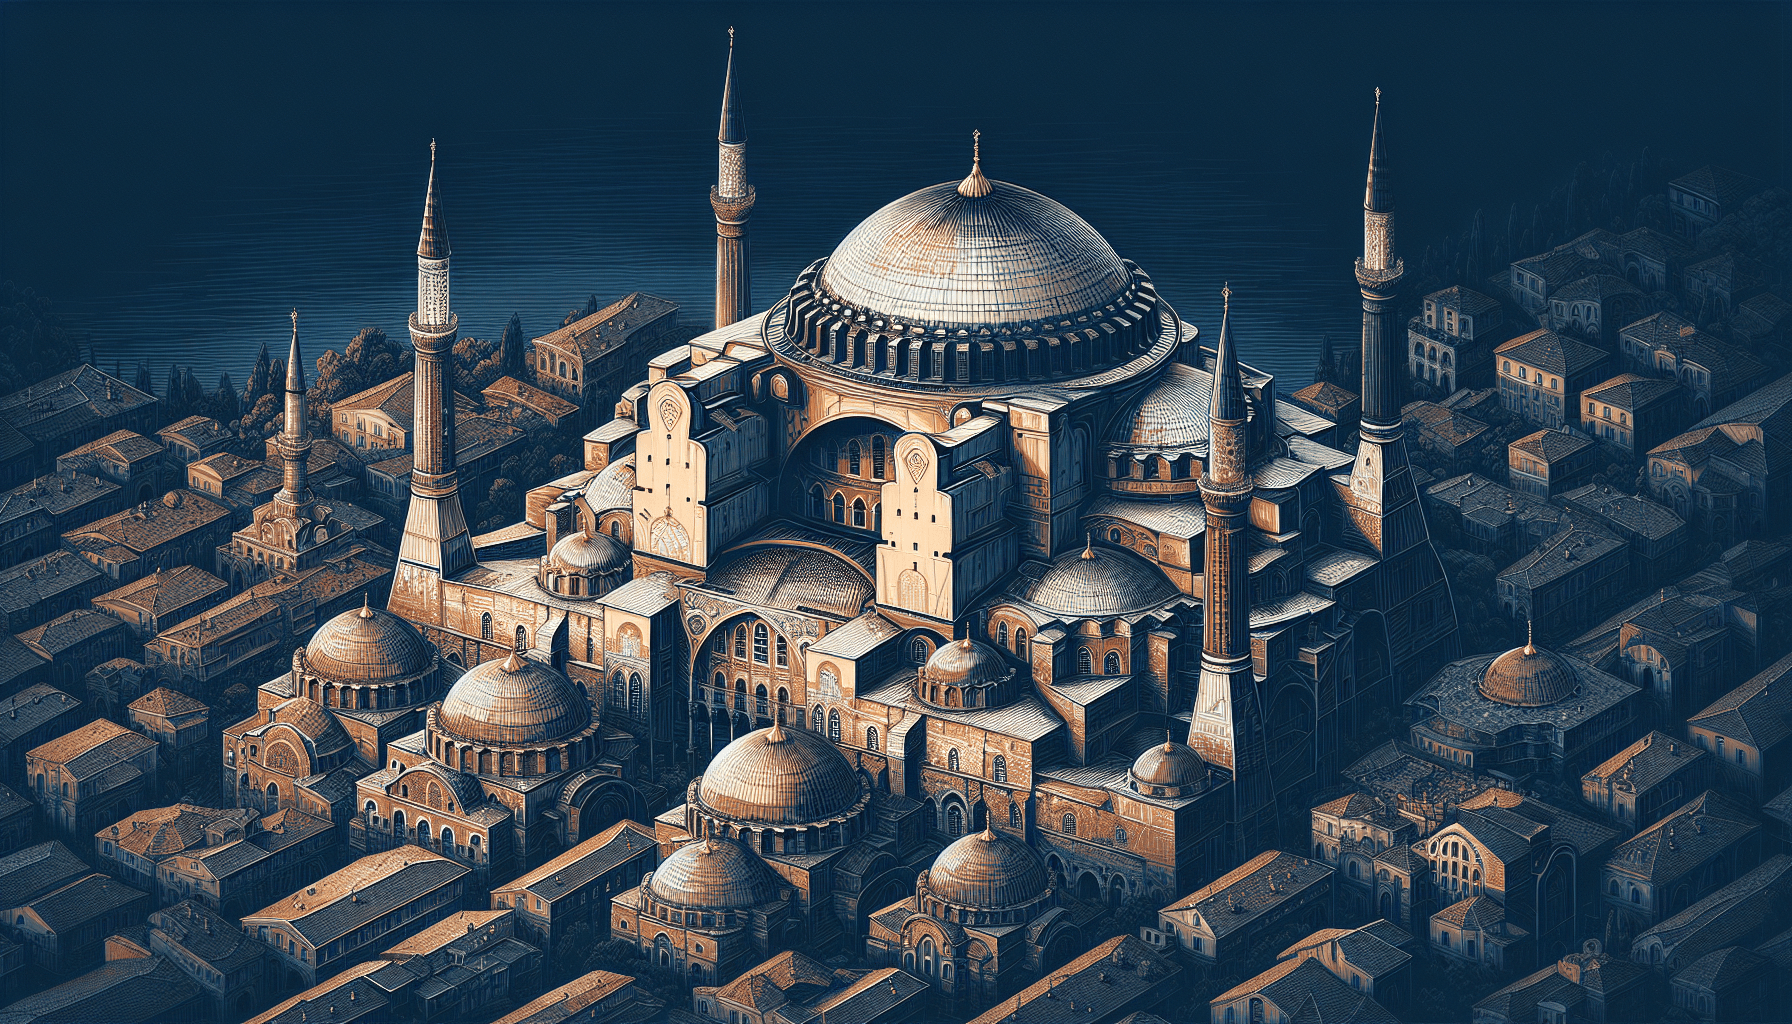 Aerial view of a grand, historic structure in Turkey with a prominent dome and multiple minarets, surrounded by a densely packed urban area. The architecture features intricate details and a mix of dark and light tones.